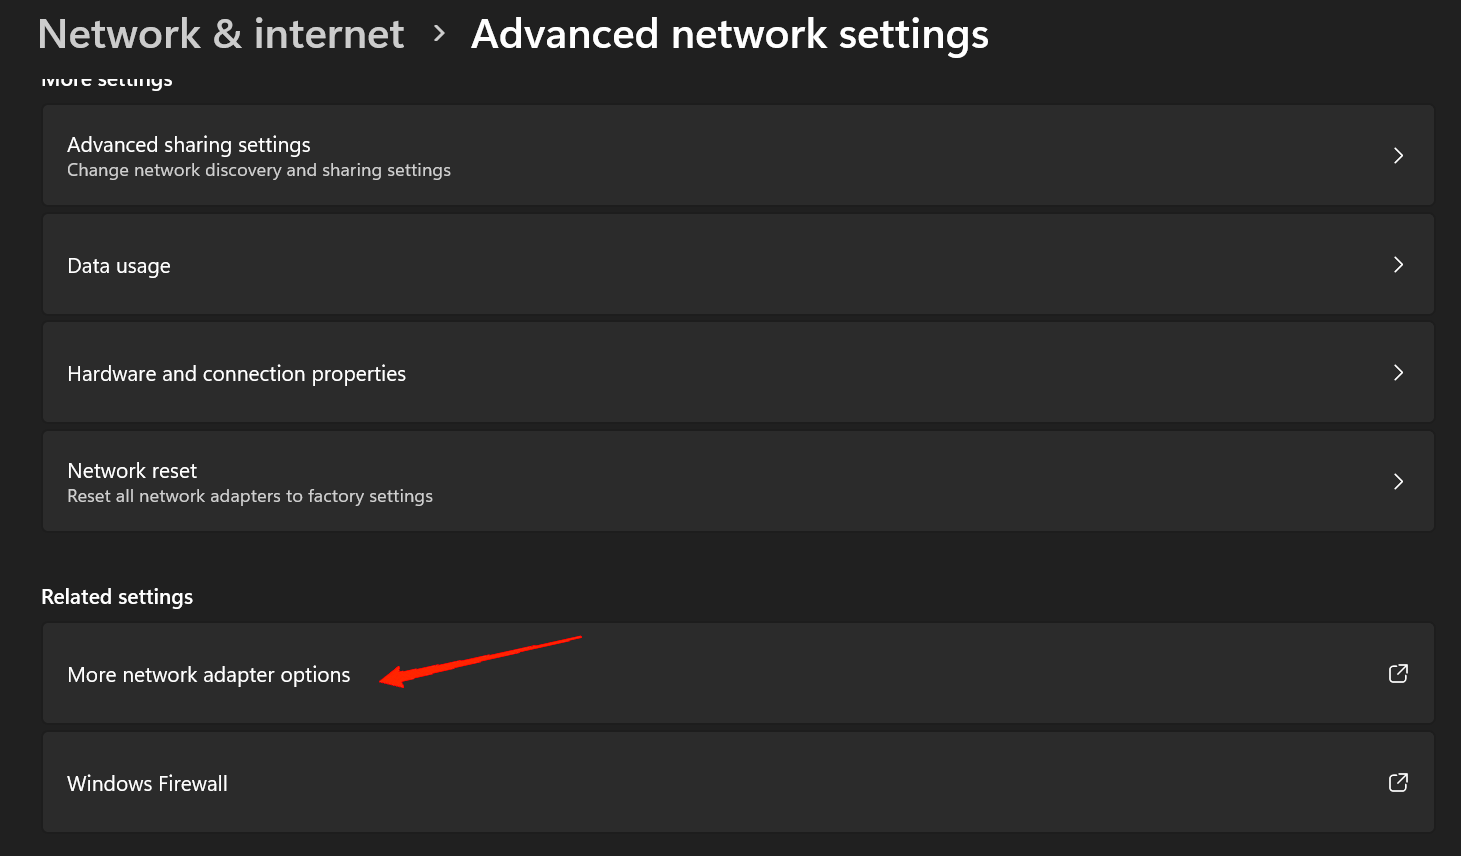 More-Network-Adapter-Options